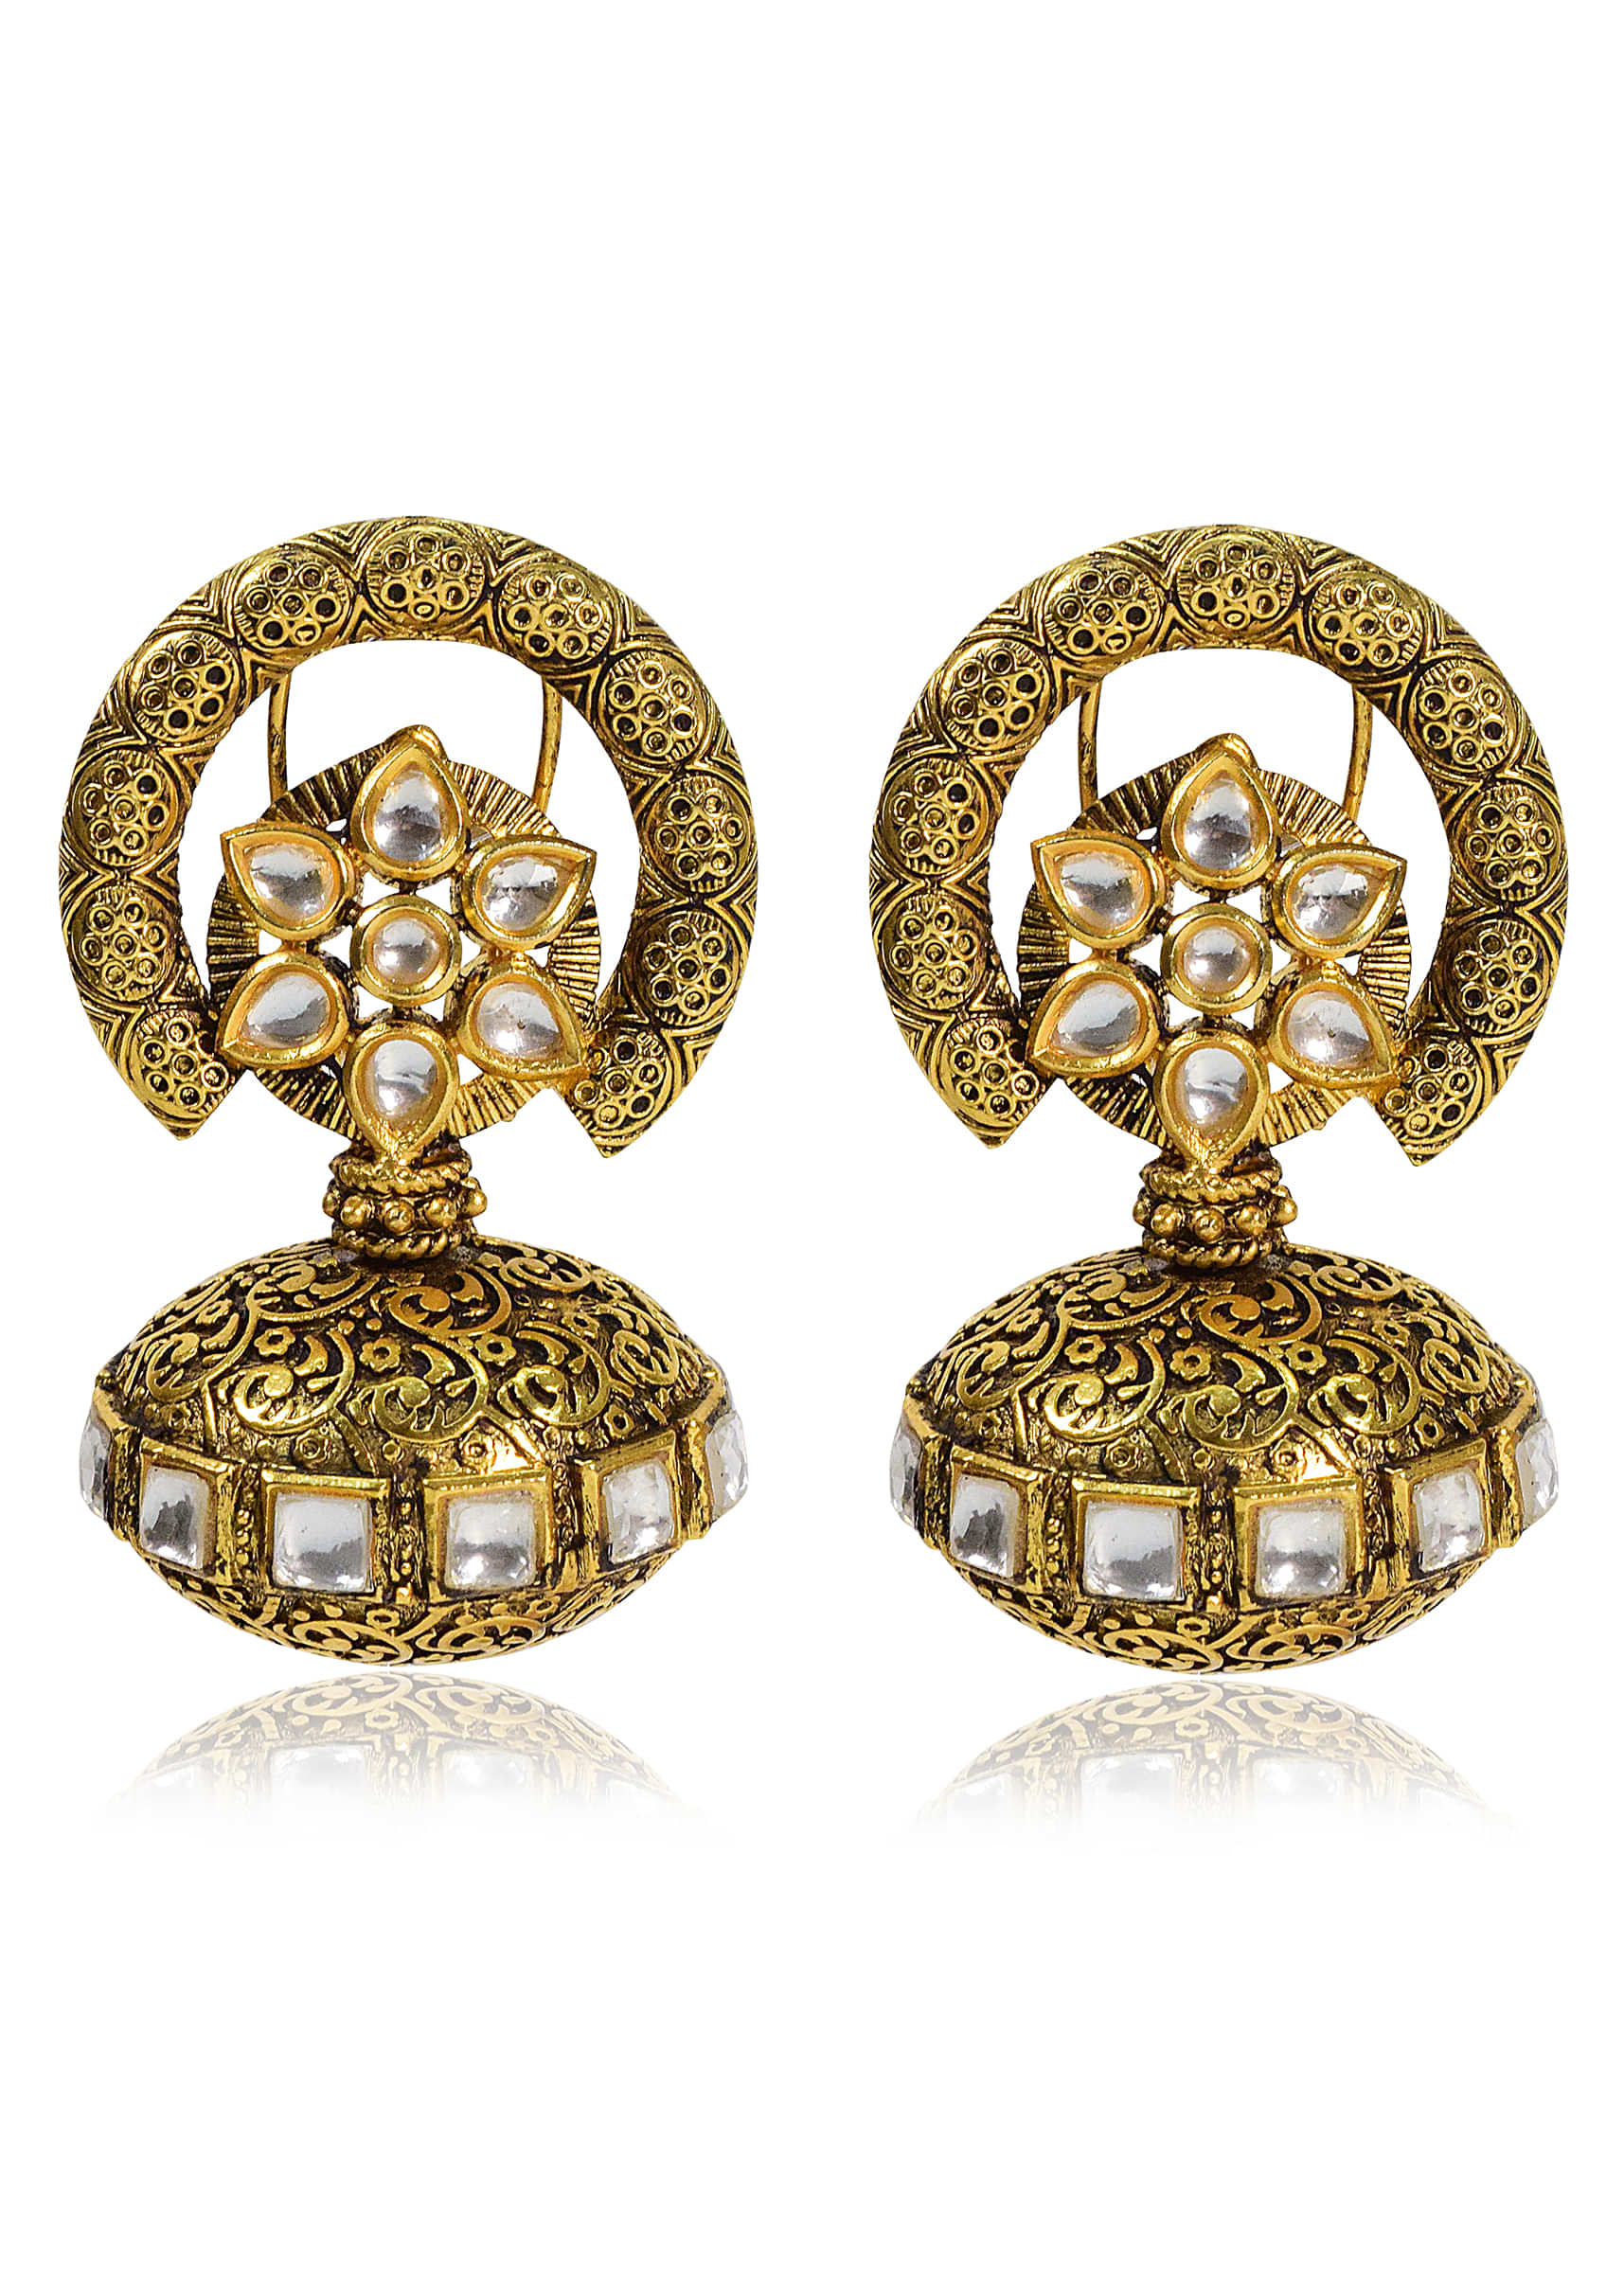 Antique Handcrafted Ethnic Gold Earrings Enhanced With Kundan